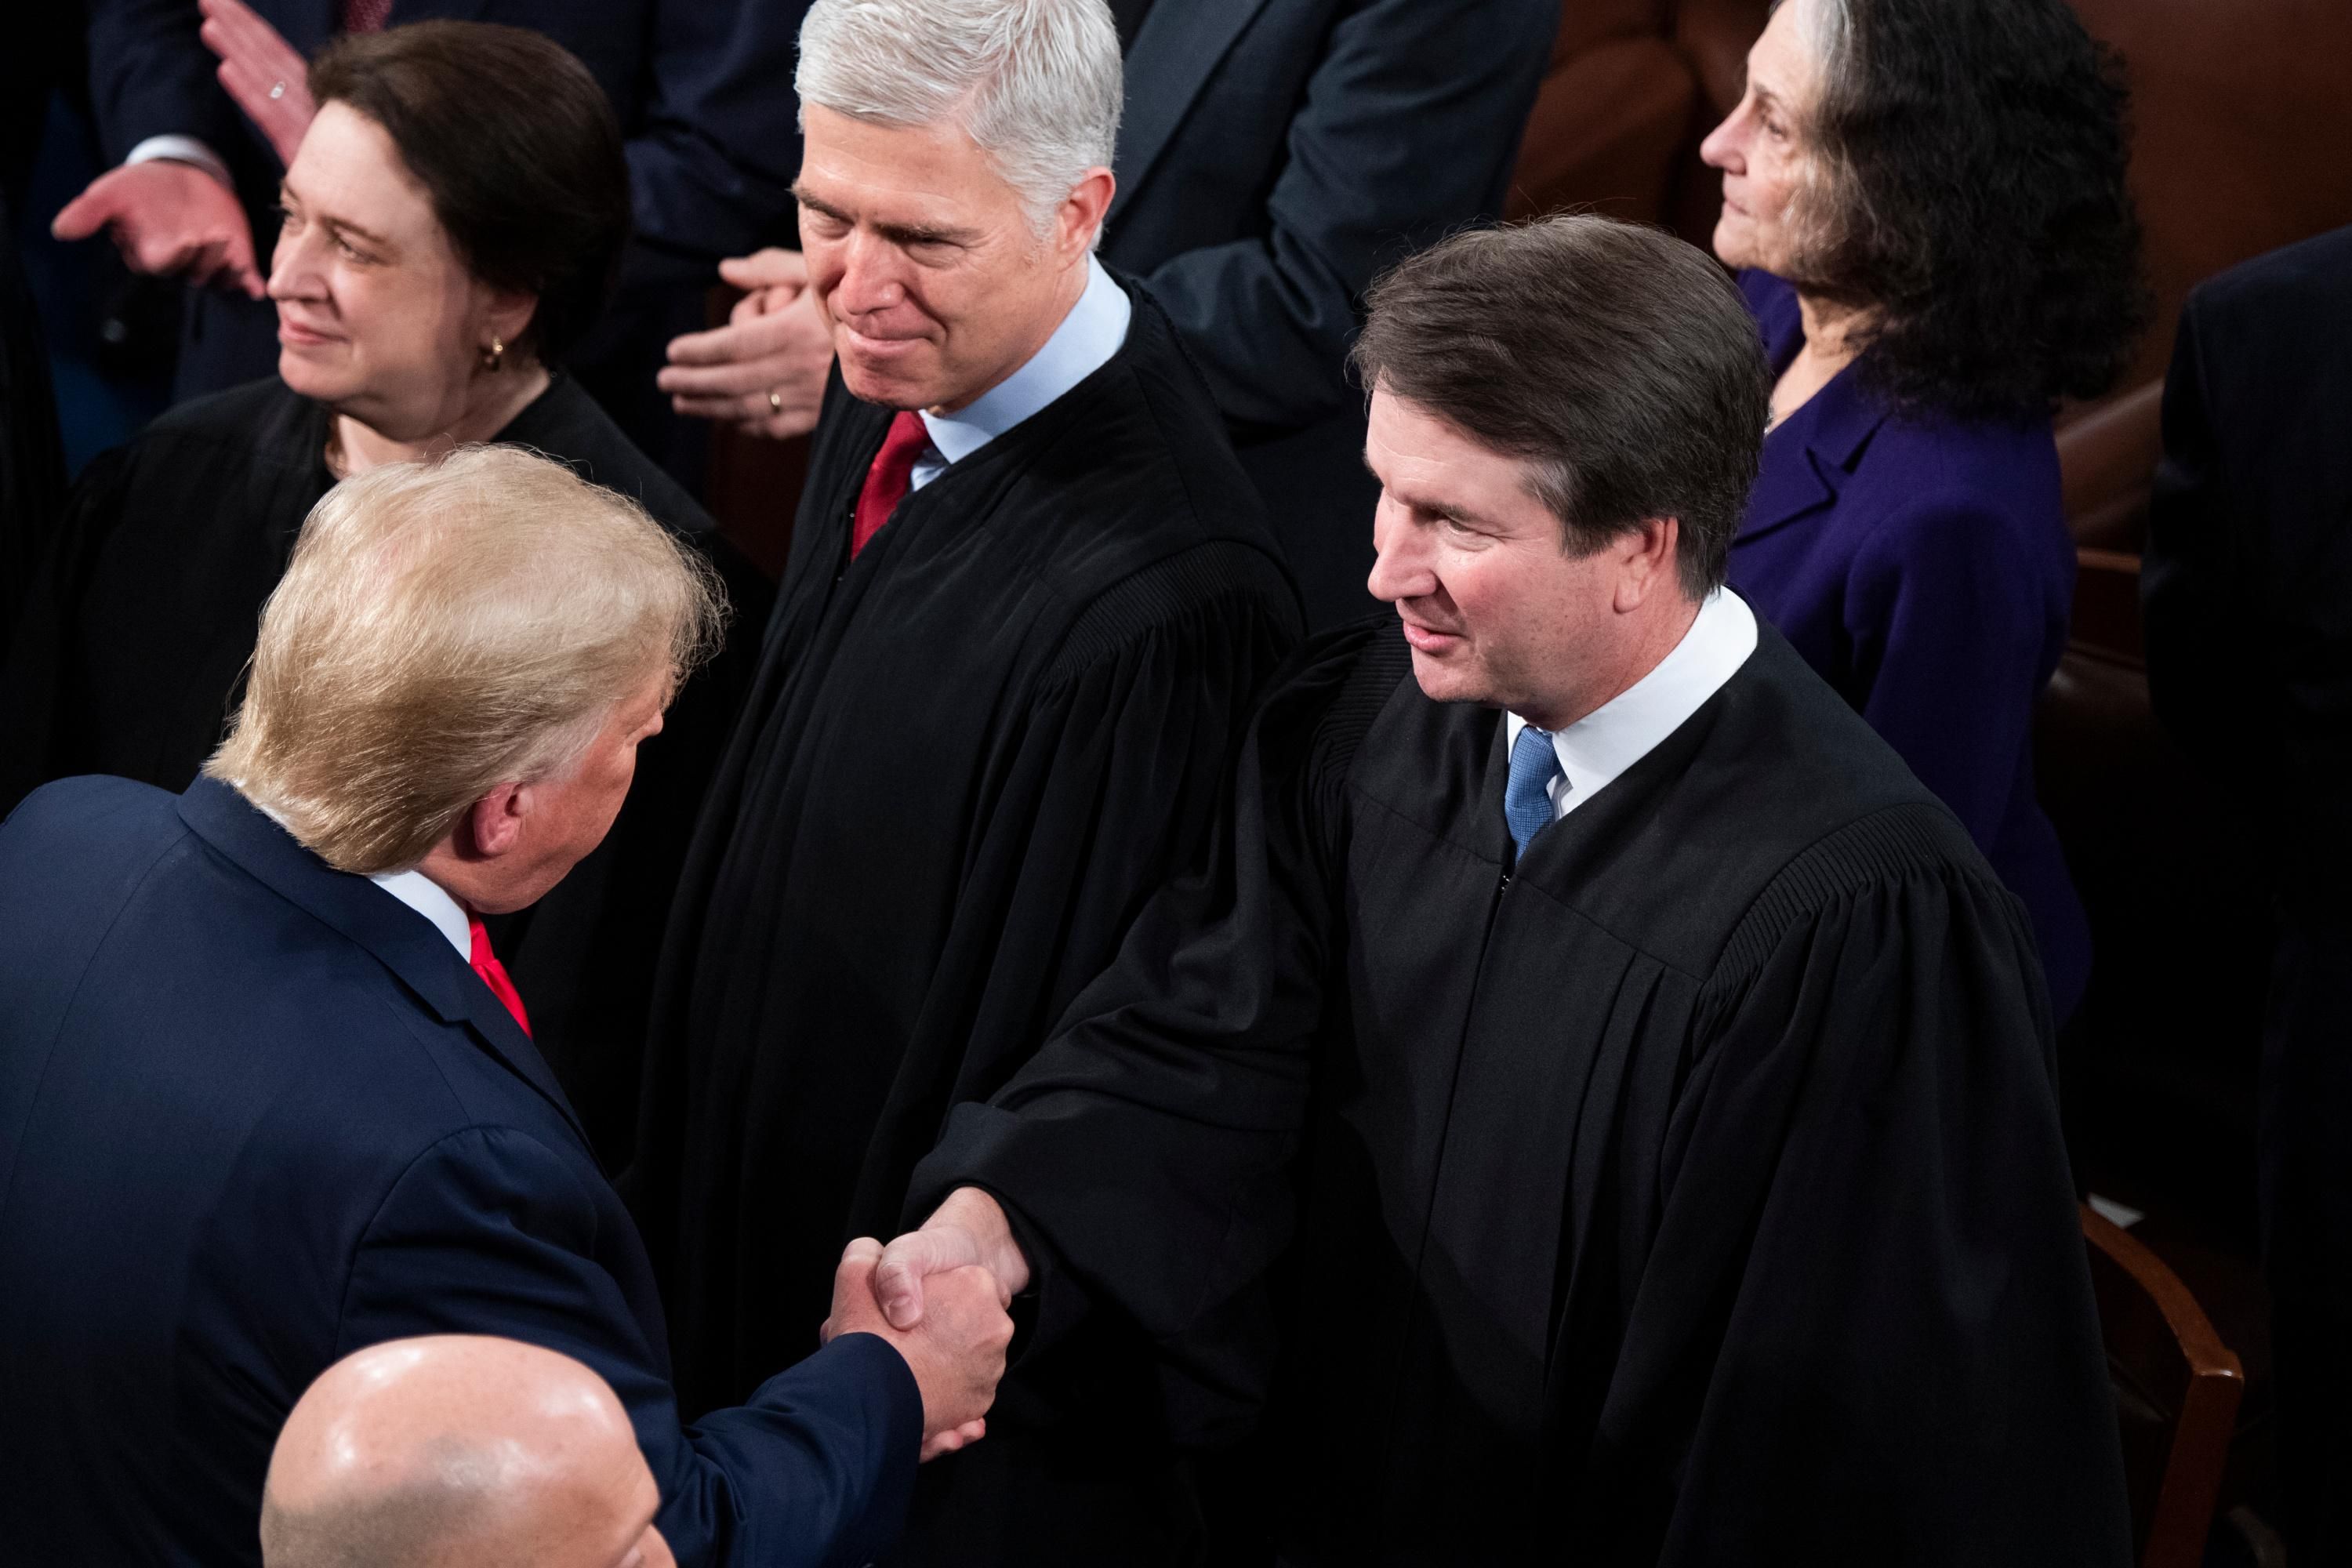 Then-President Donald Trump greets Justices Brett Kavanaugh and Neil Gorsuch